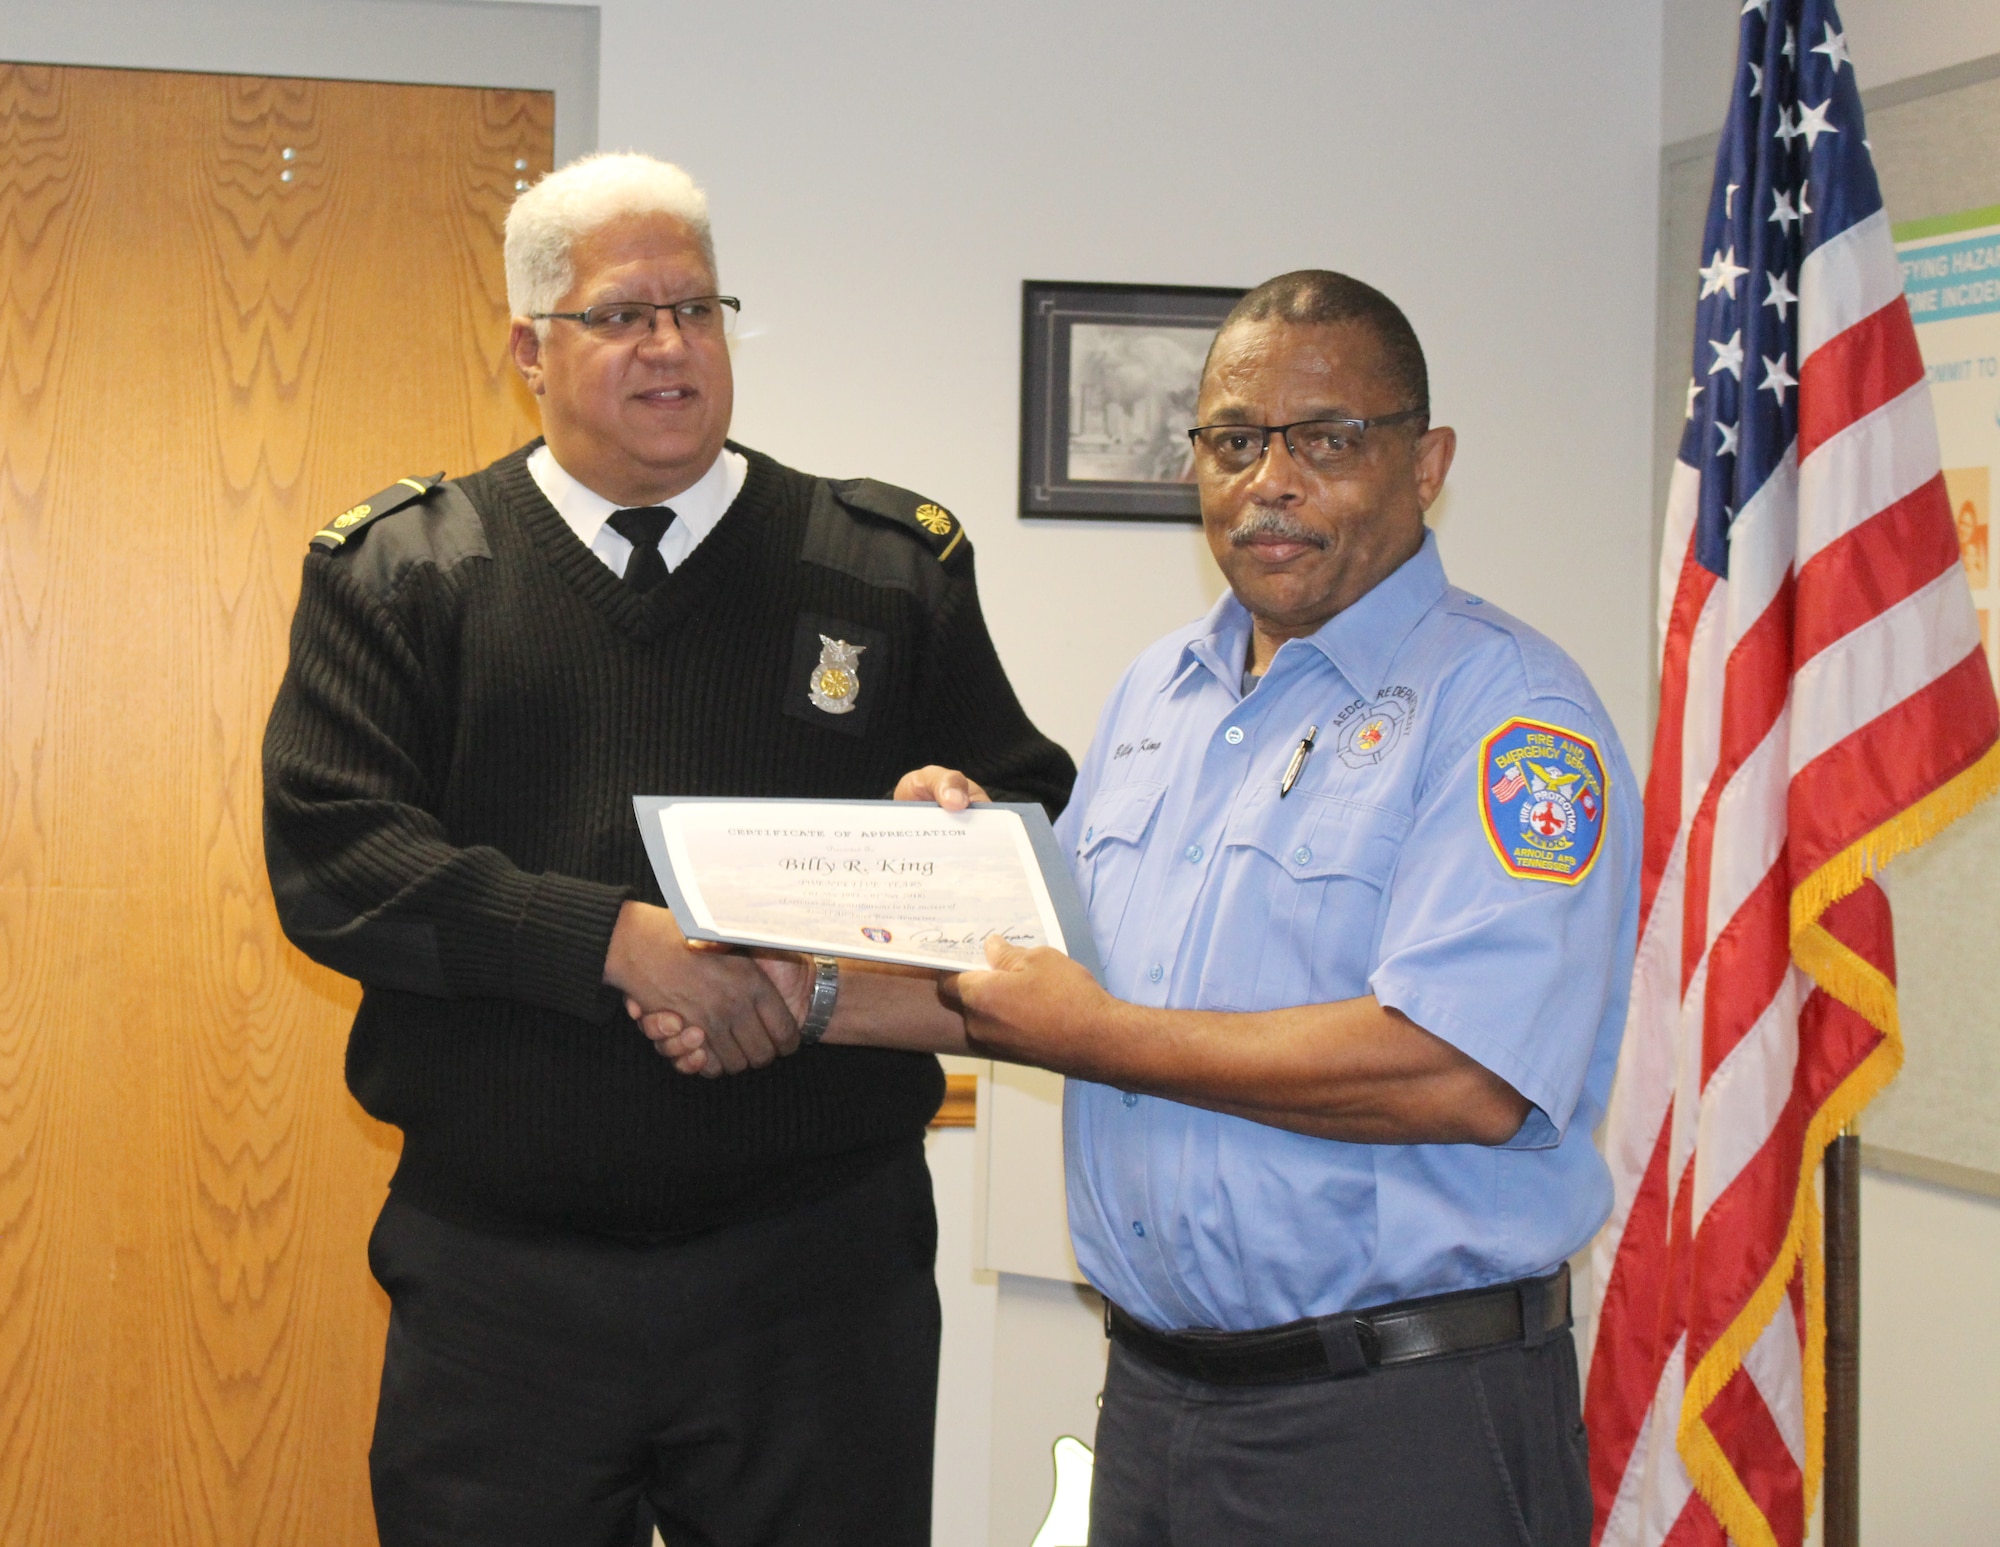 Billy King, right, firefighter for Arnold Air Force Base Fire and Emergency Services, receives a certificate recognizing his 25 years of service from Daryle Lopes, chief of Arnold Fire and Emergency Services. (U.S. Air Force photo by Deidre Ortiz)